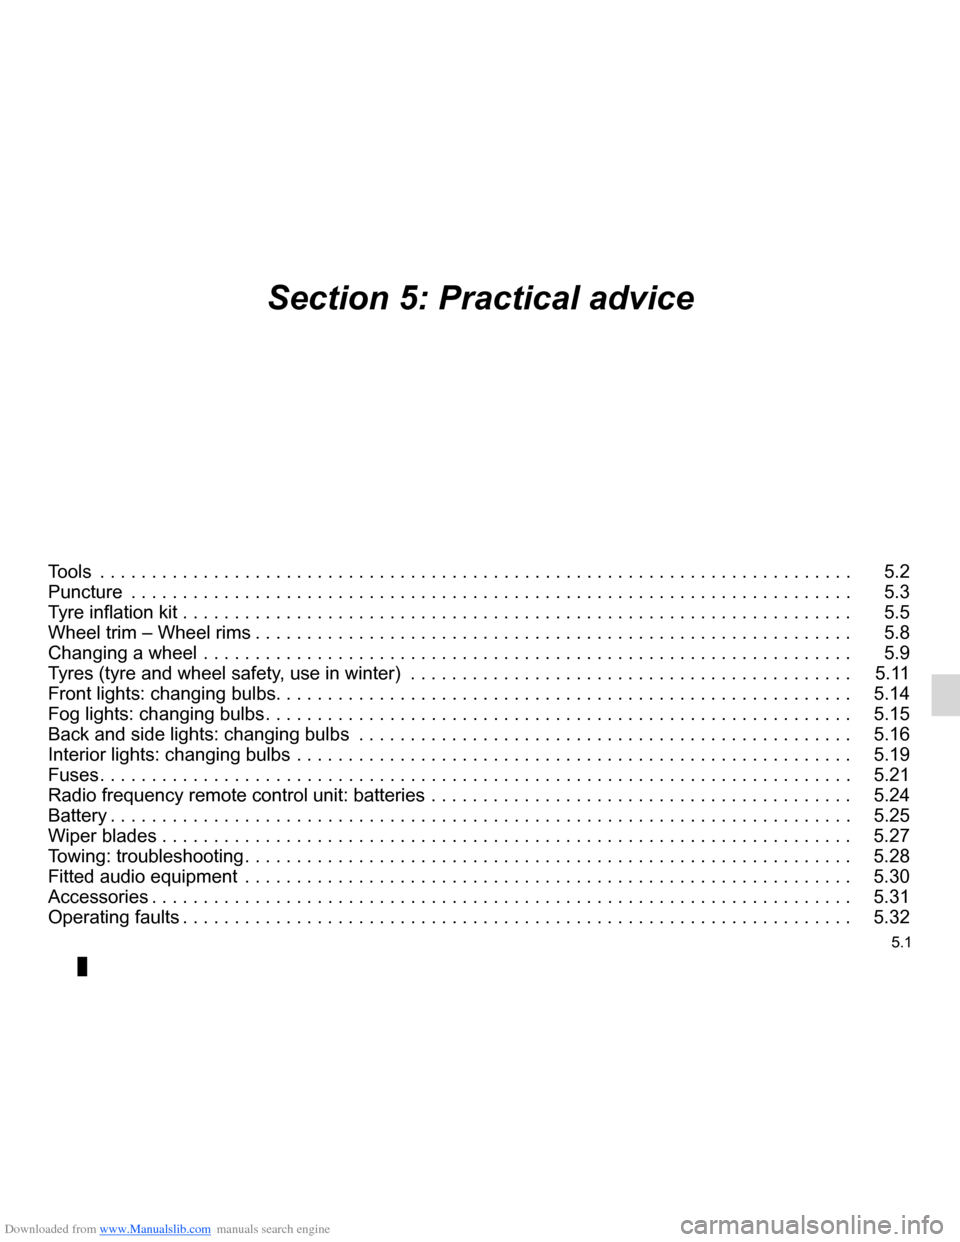 DACIA LODGY 2012 1.G Owners Guide Downloaded from www.Manualslib.com manuals search engine 5.1
ENG_UD28067_3
Sommaire 5 (X92 - Renault)
ENG_NU_975-3_X92_Dacia_5
Section 5: Practical advice
Tools  . . . . . . . . . . . . . . . . . . . 